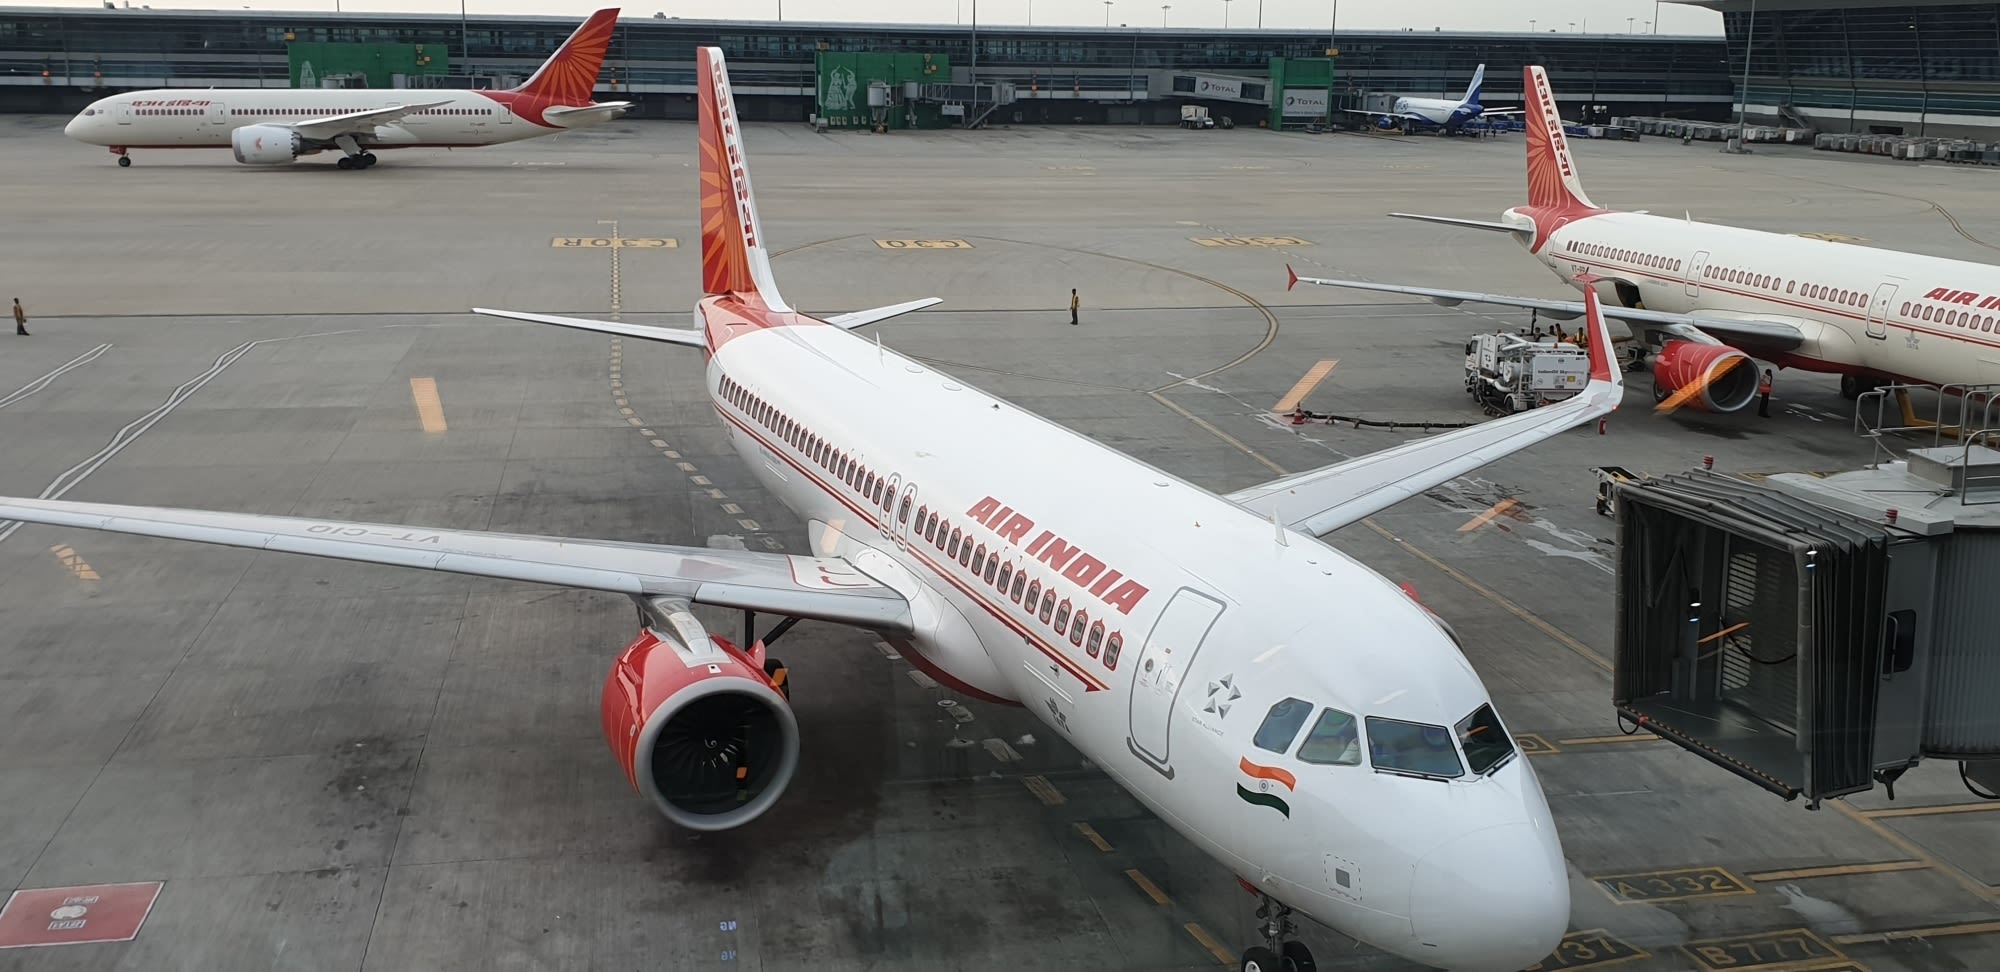 Pakistan closes a corridor of its air space, Air India says won’t affect us much